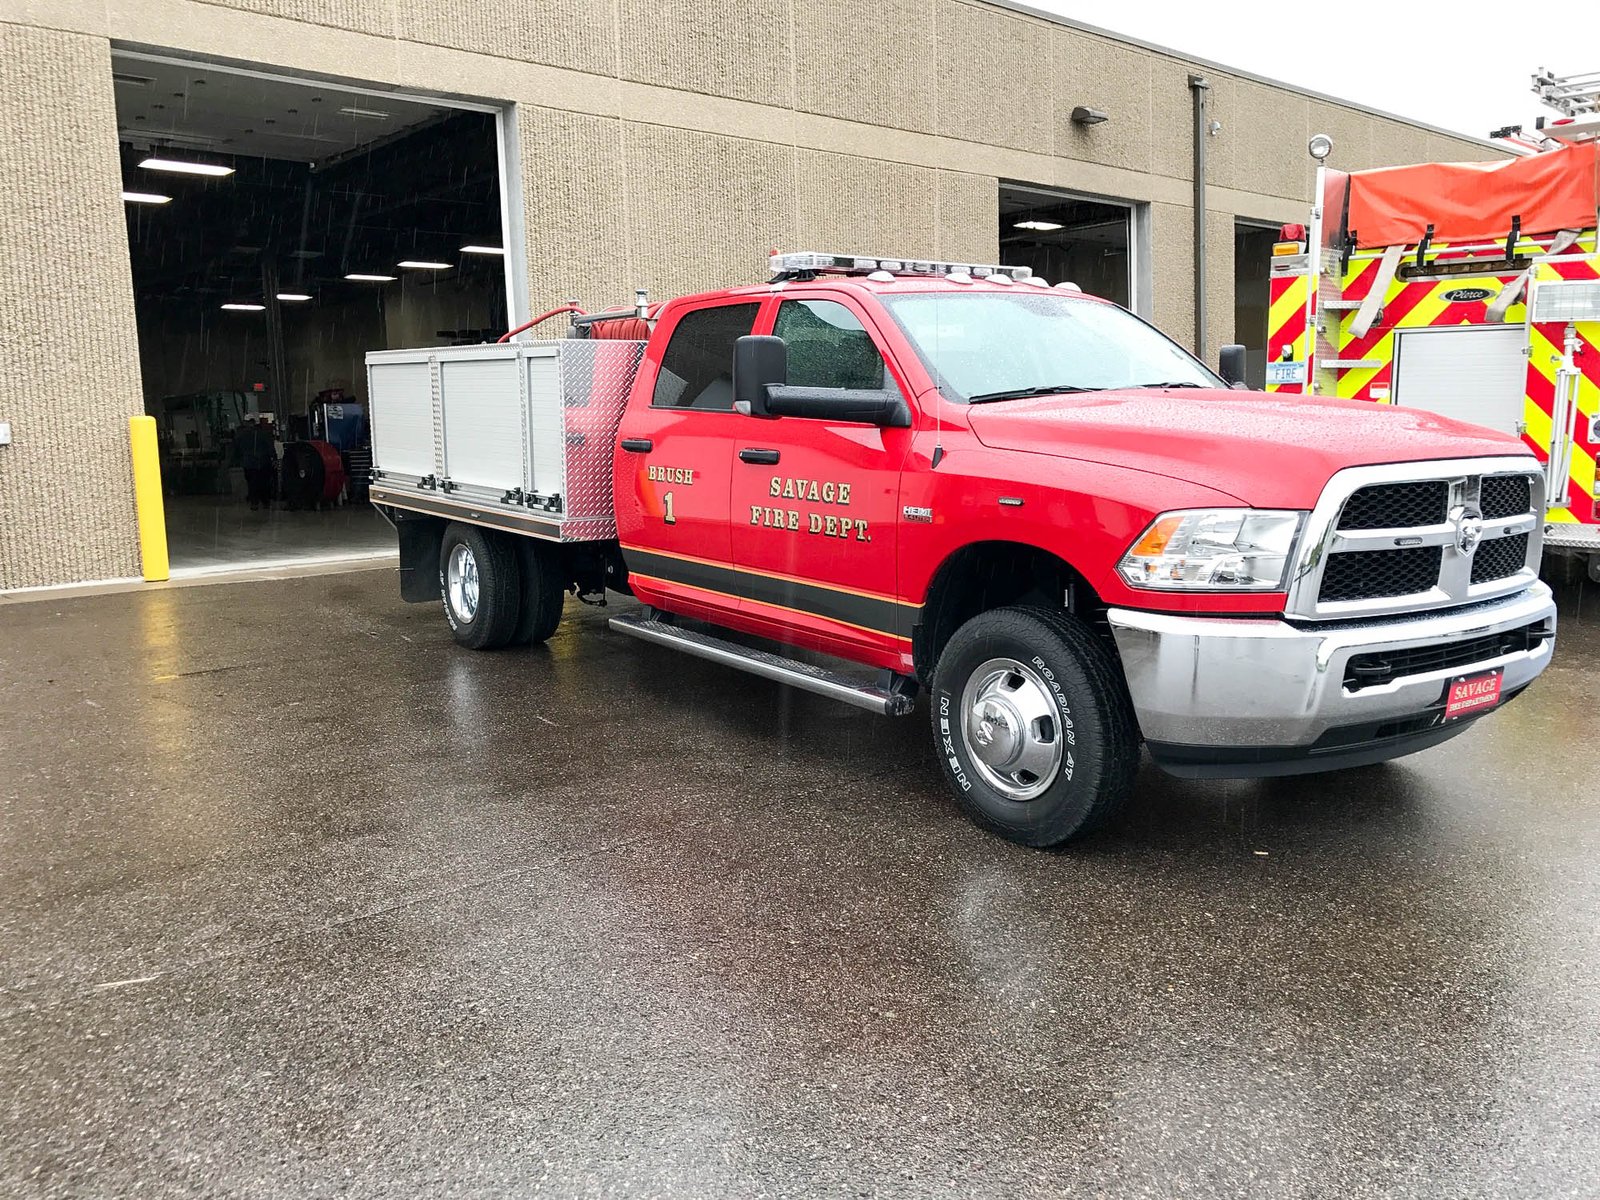 Savage Fire Department – Flat Bed